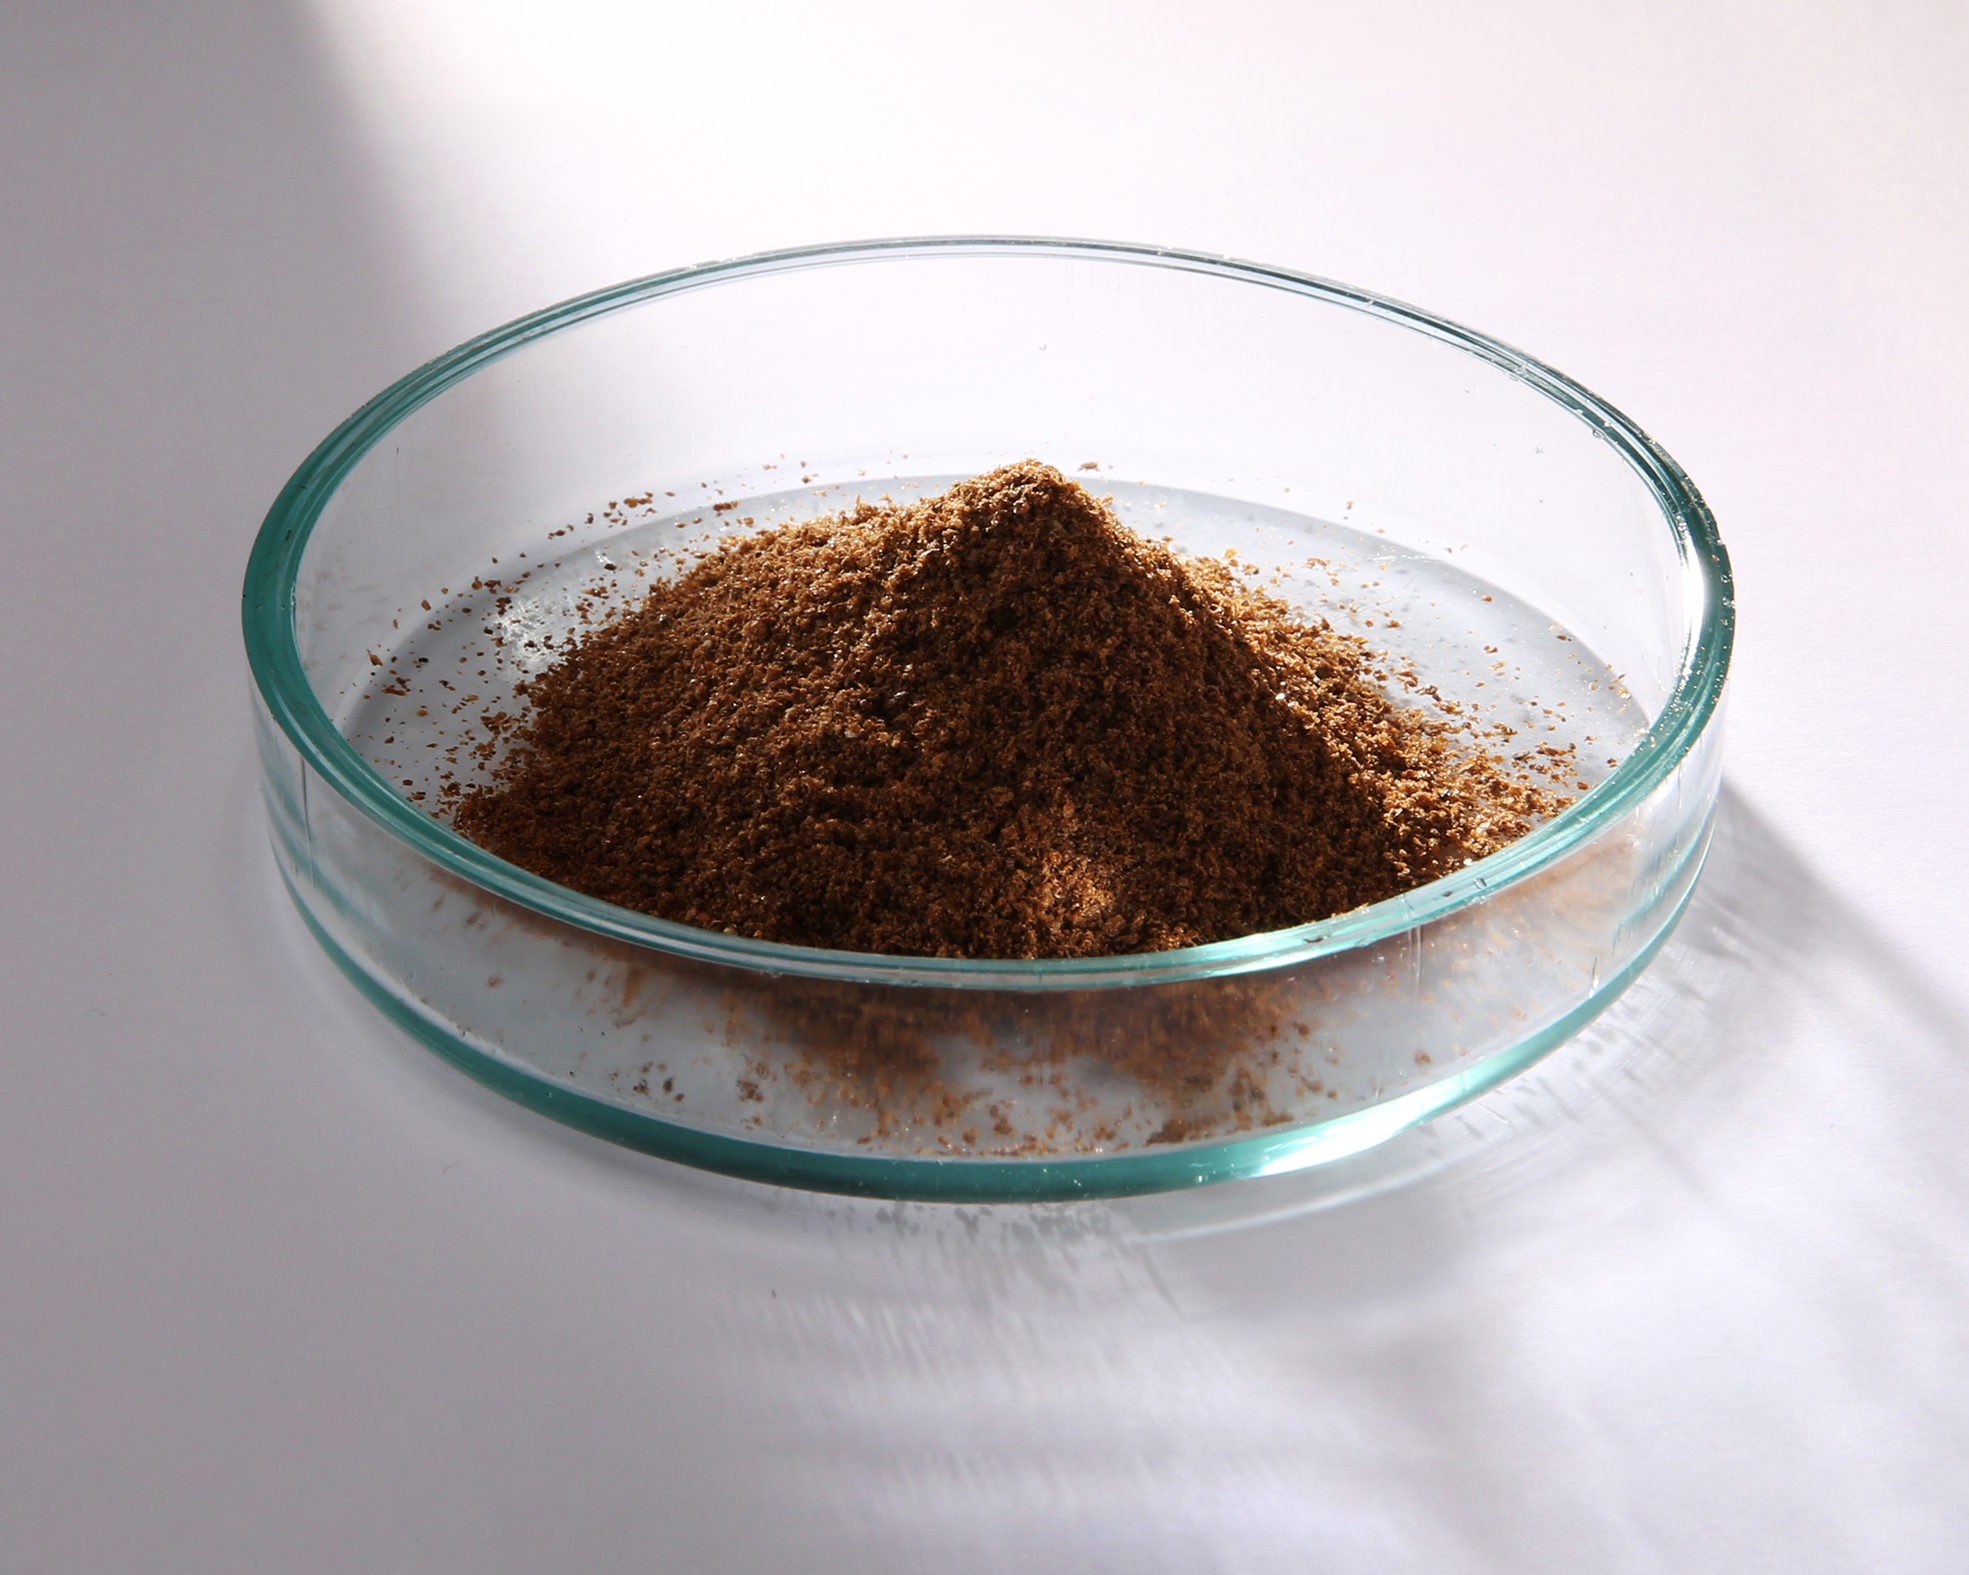 Defatted insect powder (DIP)